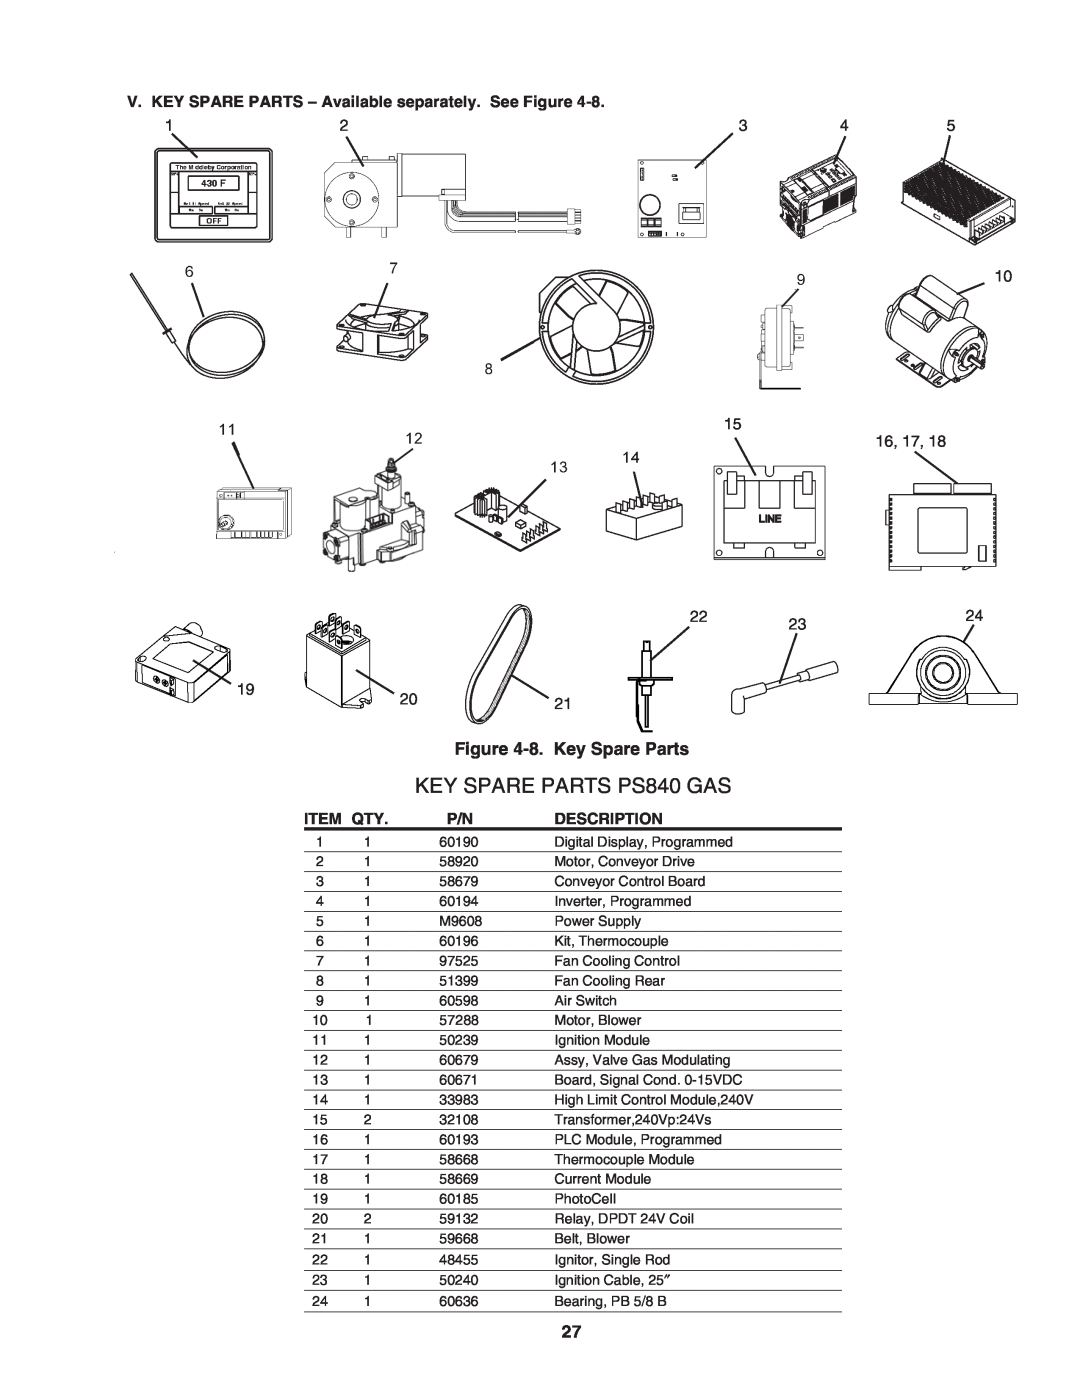 Middleby Marshall PS840 Series installation manual KEY SPARE PARTS PS840 GAS, 8. Key Spare Parts 